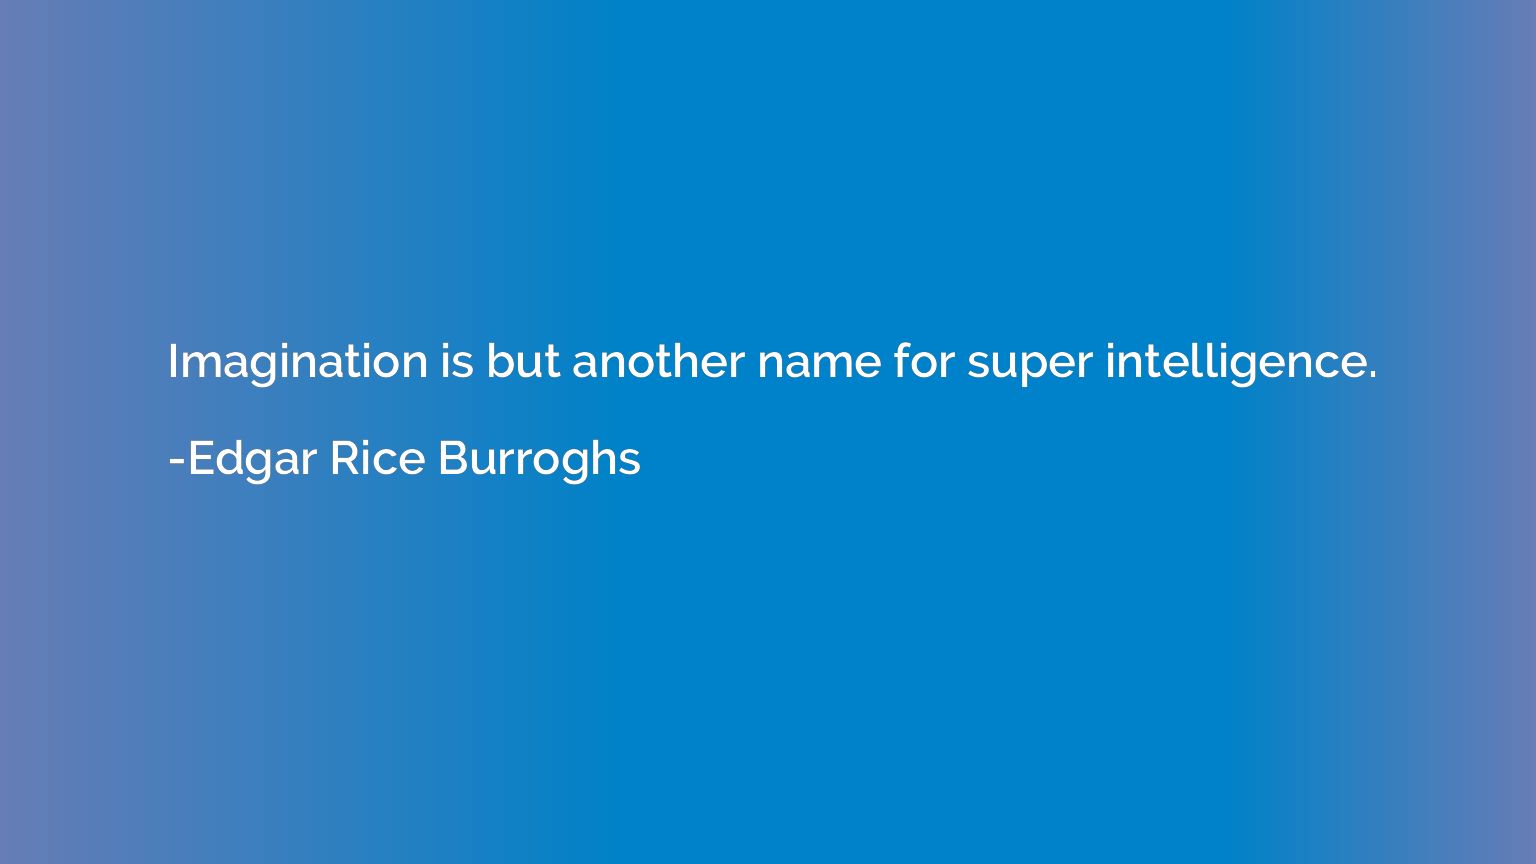 Imagination is but another name for super intelligence.